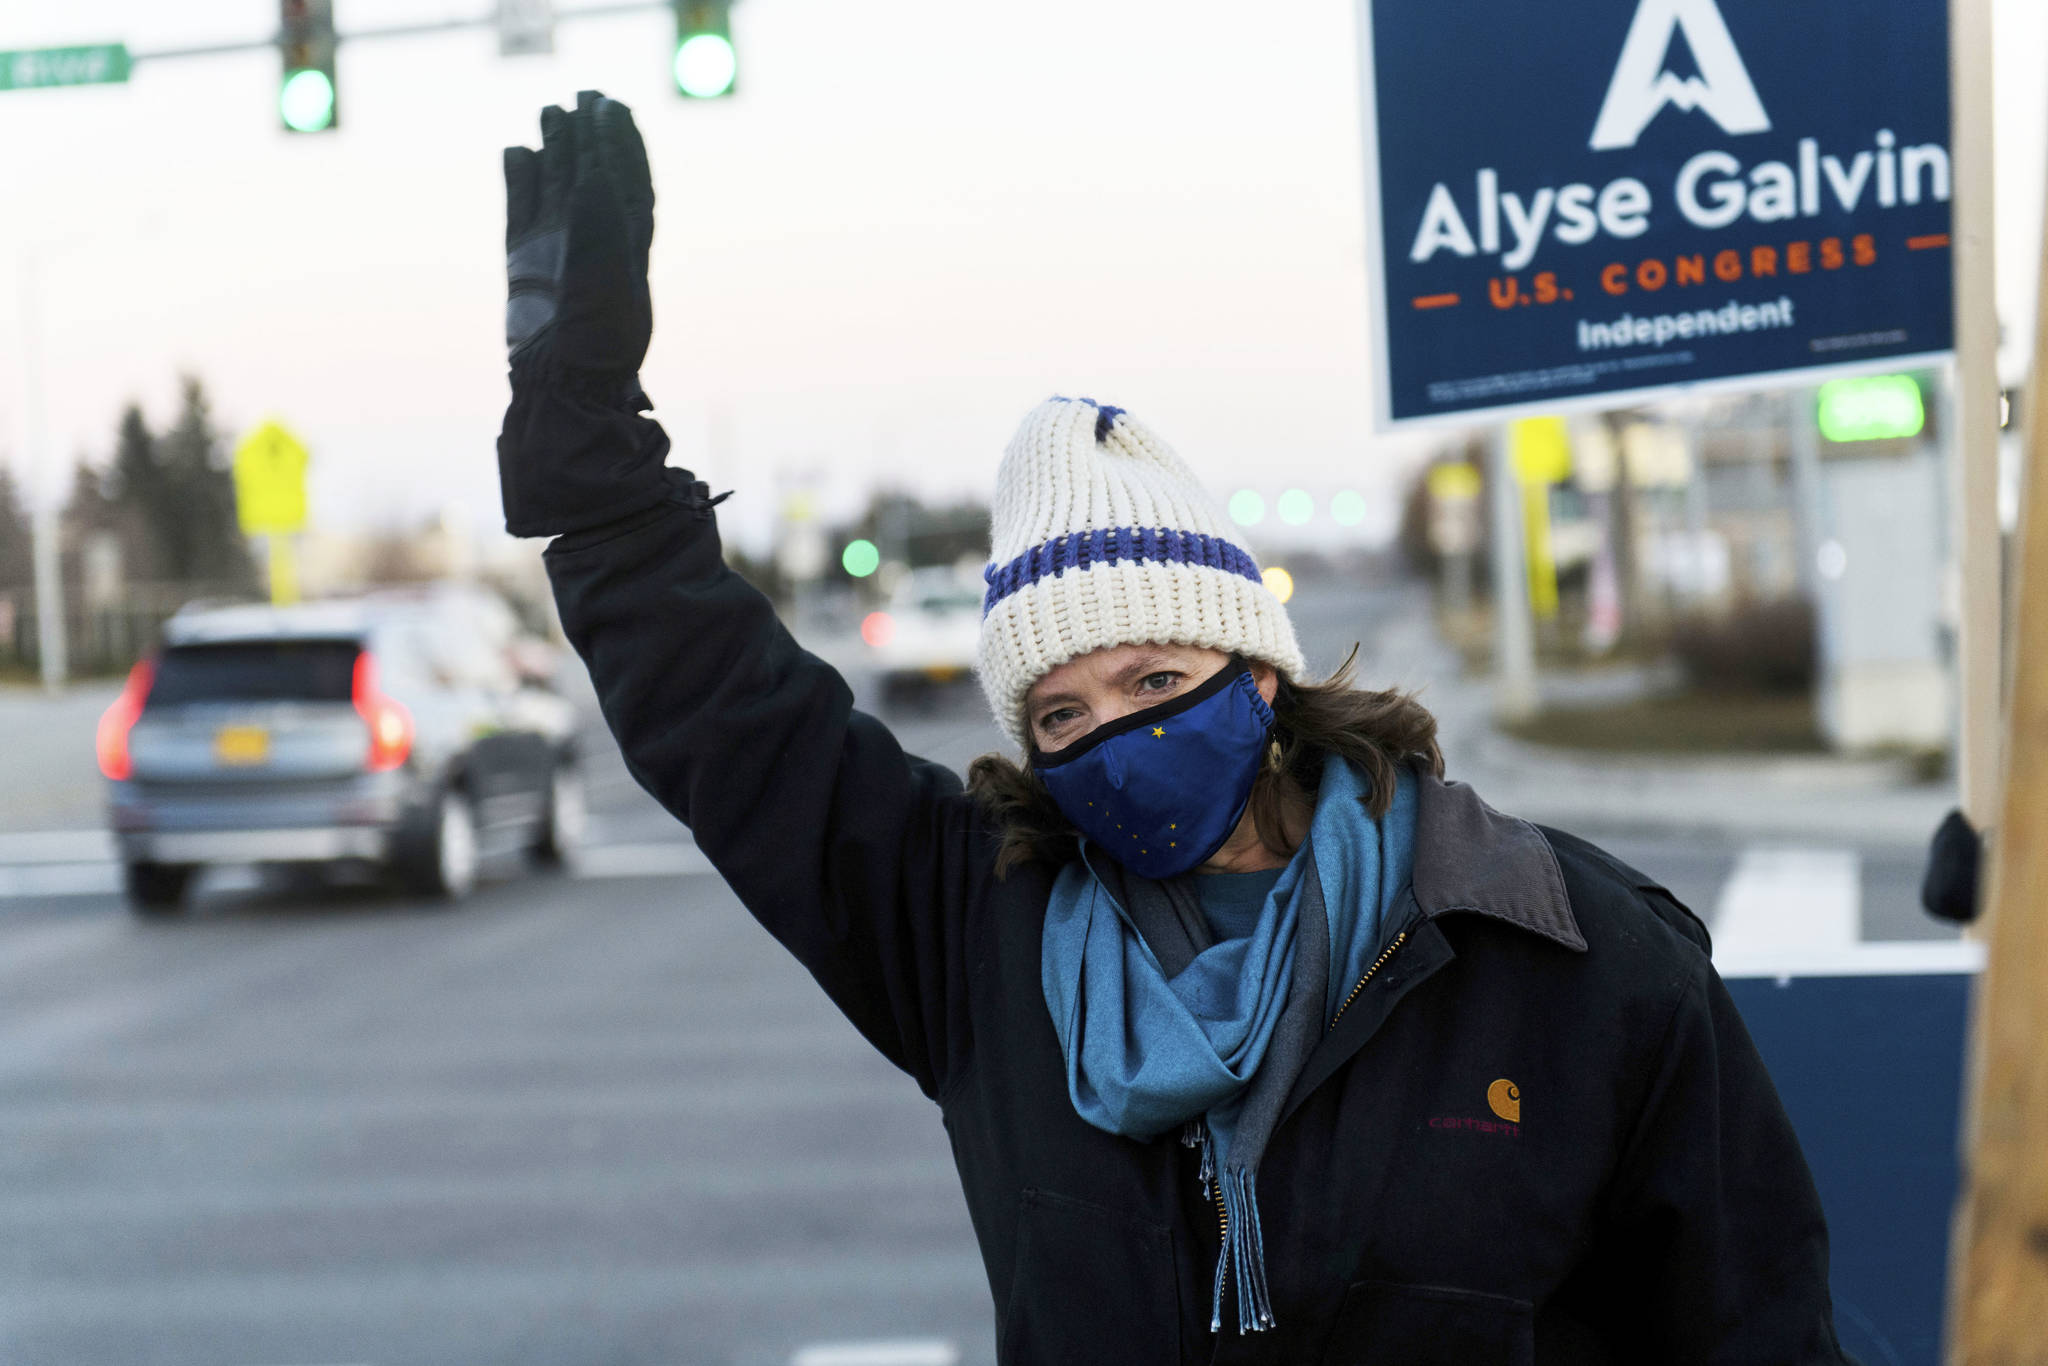 U.S. House Independent candidate Alyse Galvin waves to cars with supporters at Northern Lights Boulevard and Minnesota Drive on Election Day, Tuesday, Nov. 3, 2020, in Anchorage, Alaska. Galvin, an independent, is trying to unseat U.S. Rep. Don Young, Alaska’s sole member of the U.S. House and in office since 1973. (Marc Lester/Anchorage Daily News via AP)